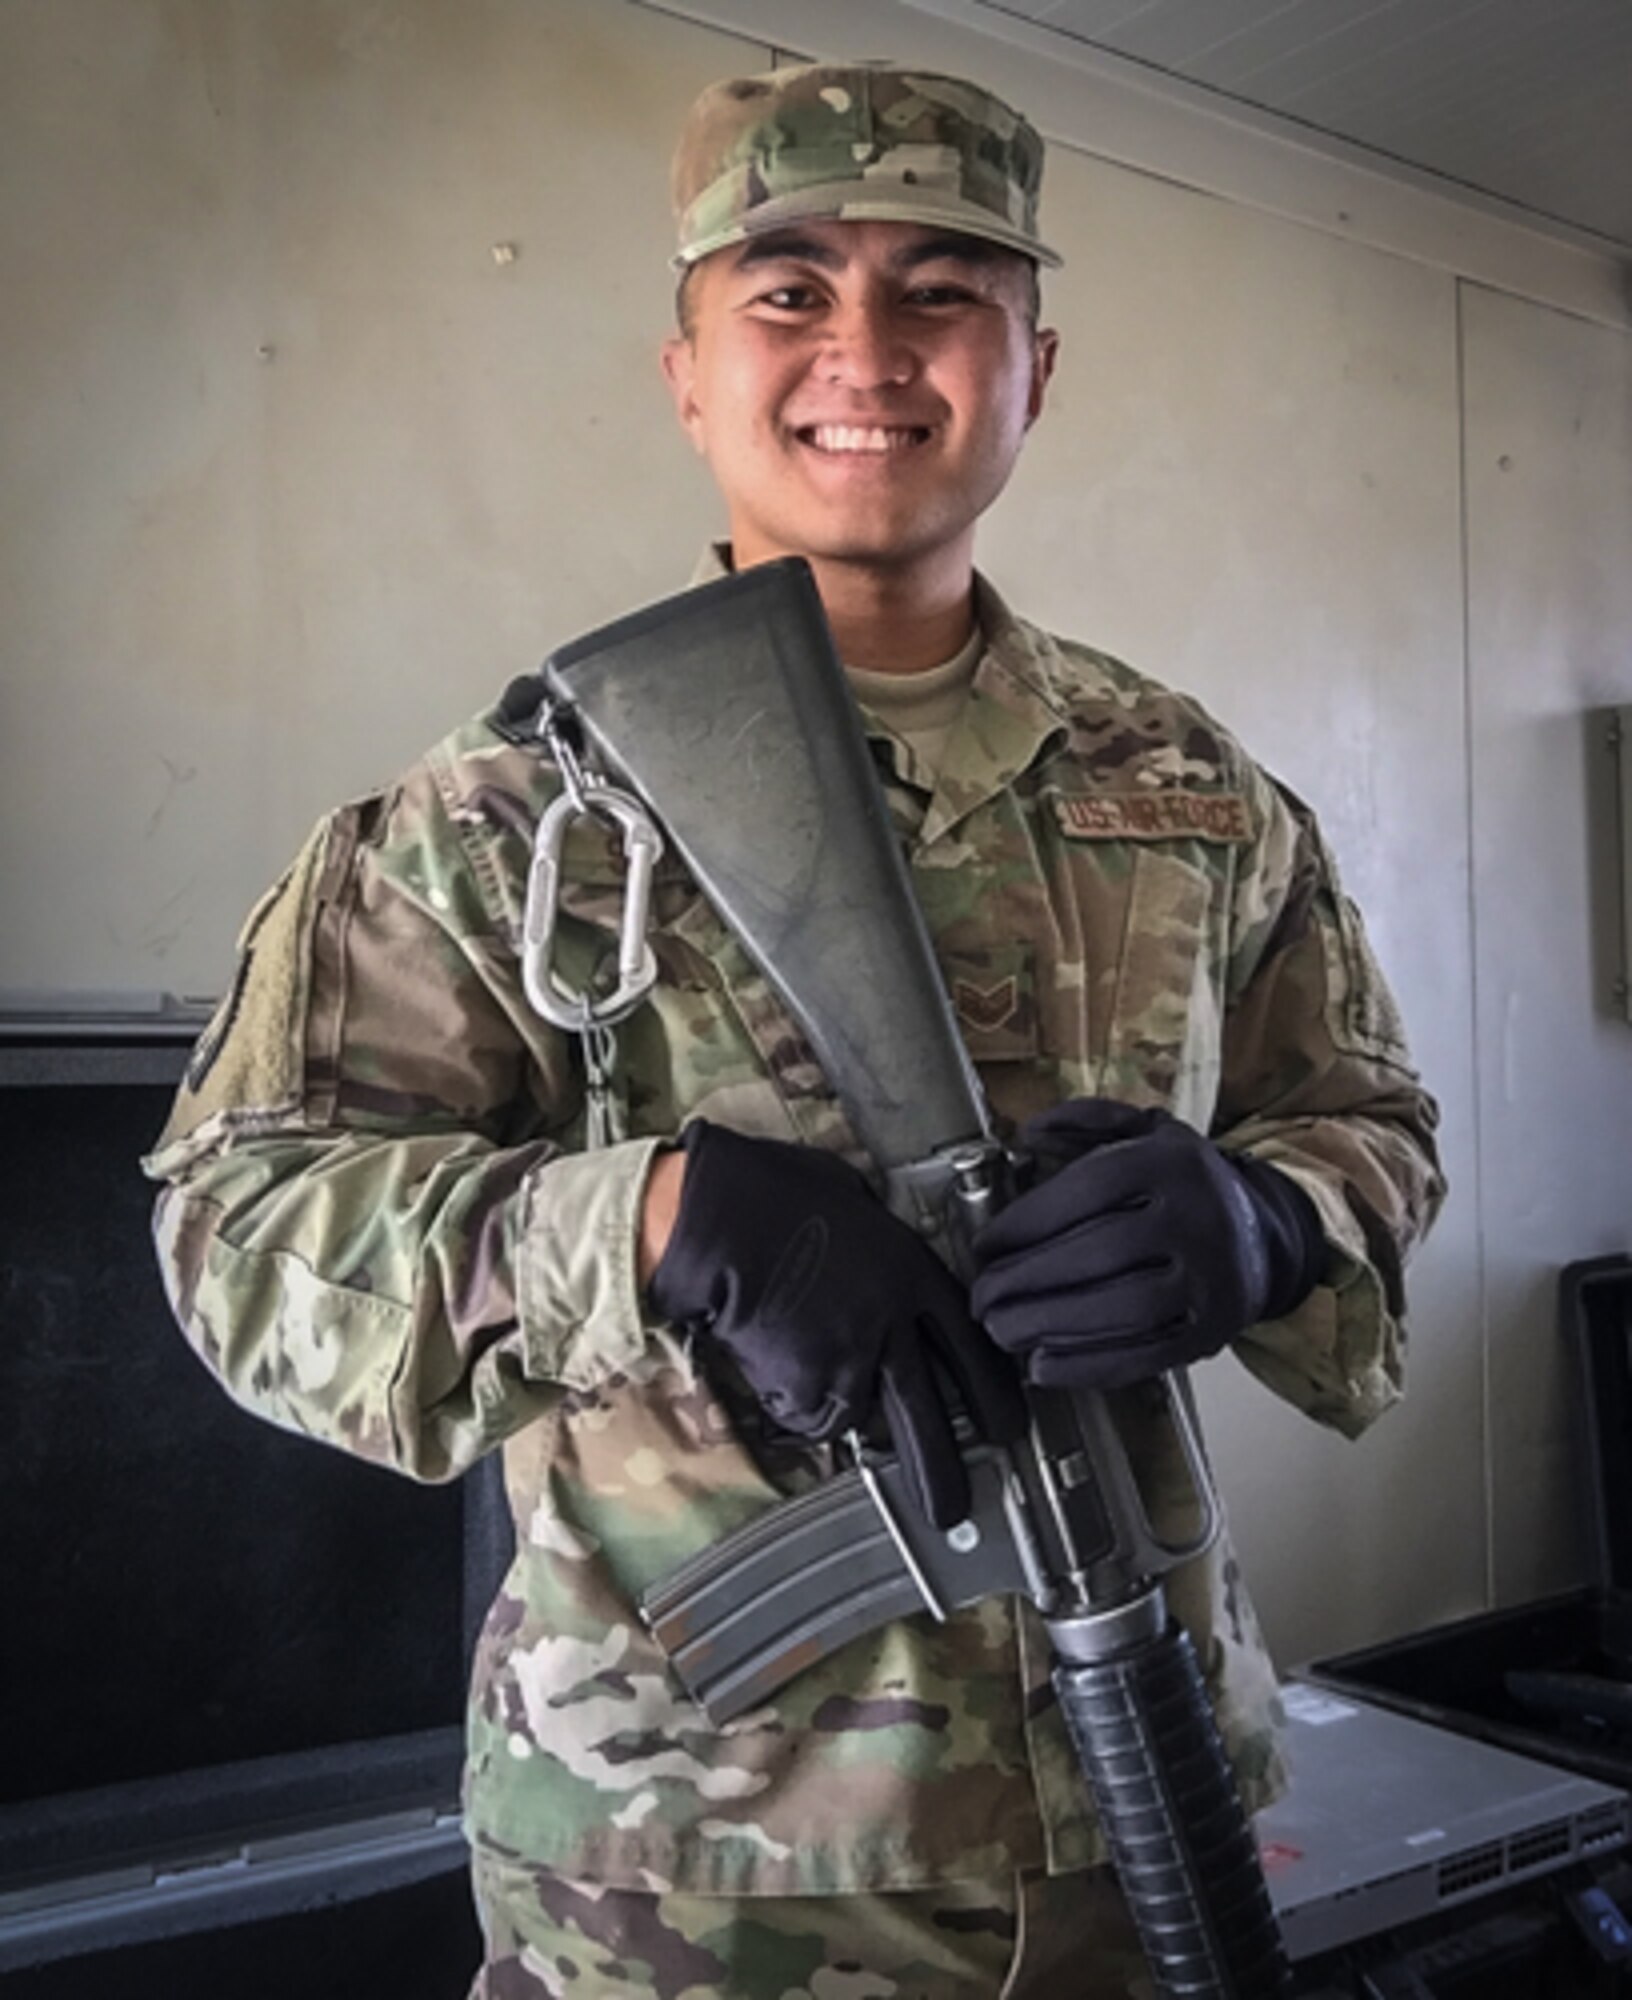 U.S. Air Force Staff Sgt. Junbryan Samson, a cyber network technician assigned to the U.S. Air Forces Central Command communications division at the Combined Air Operations Center smiles for a photo July 24, 2017, at Al Asad Air Base, Iraq. Samson traveled to Iraq to set up 40 network stations in support Air Force units forward deployed in the fight against ISIS. (Courtesy photo by Staff Sgt. Junbryan Samson